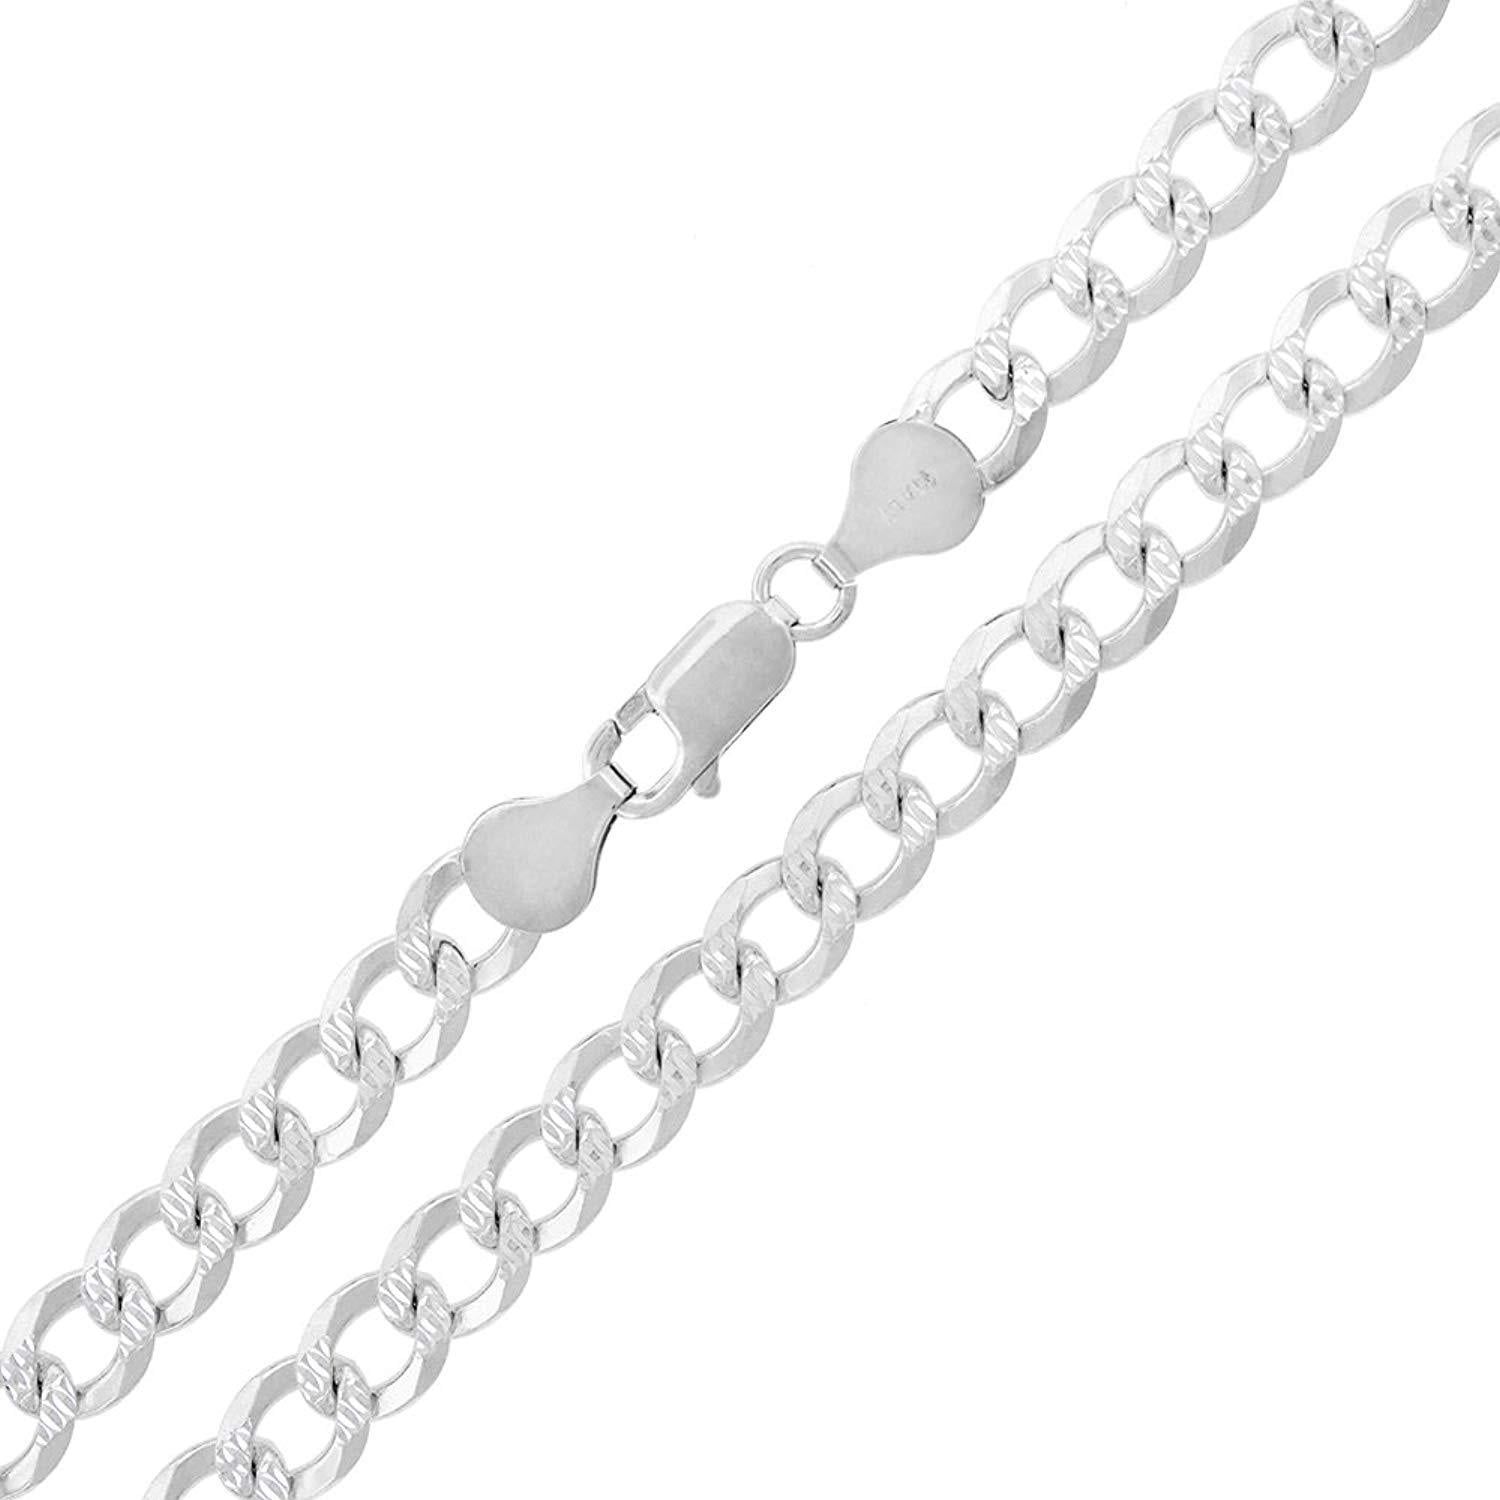 Solid 925 Sterling Silver 4.5mm Pave Diamond Cut Curb Link Cuban Chain Necklace 